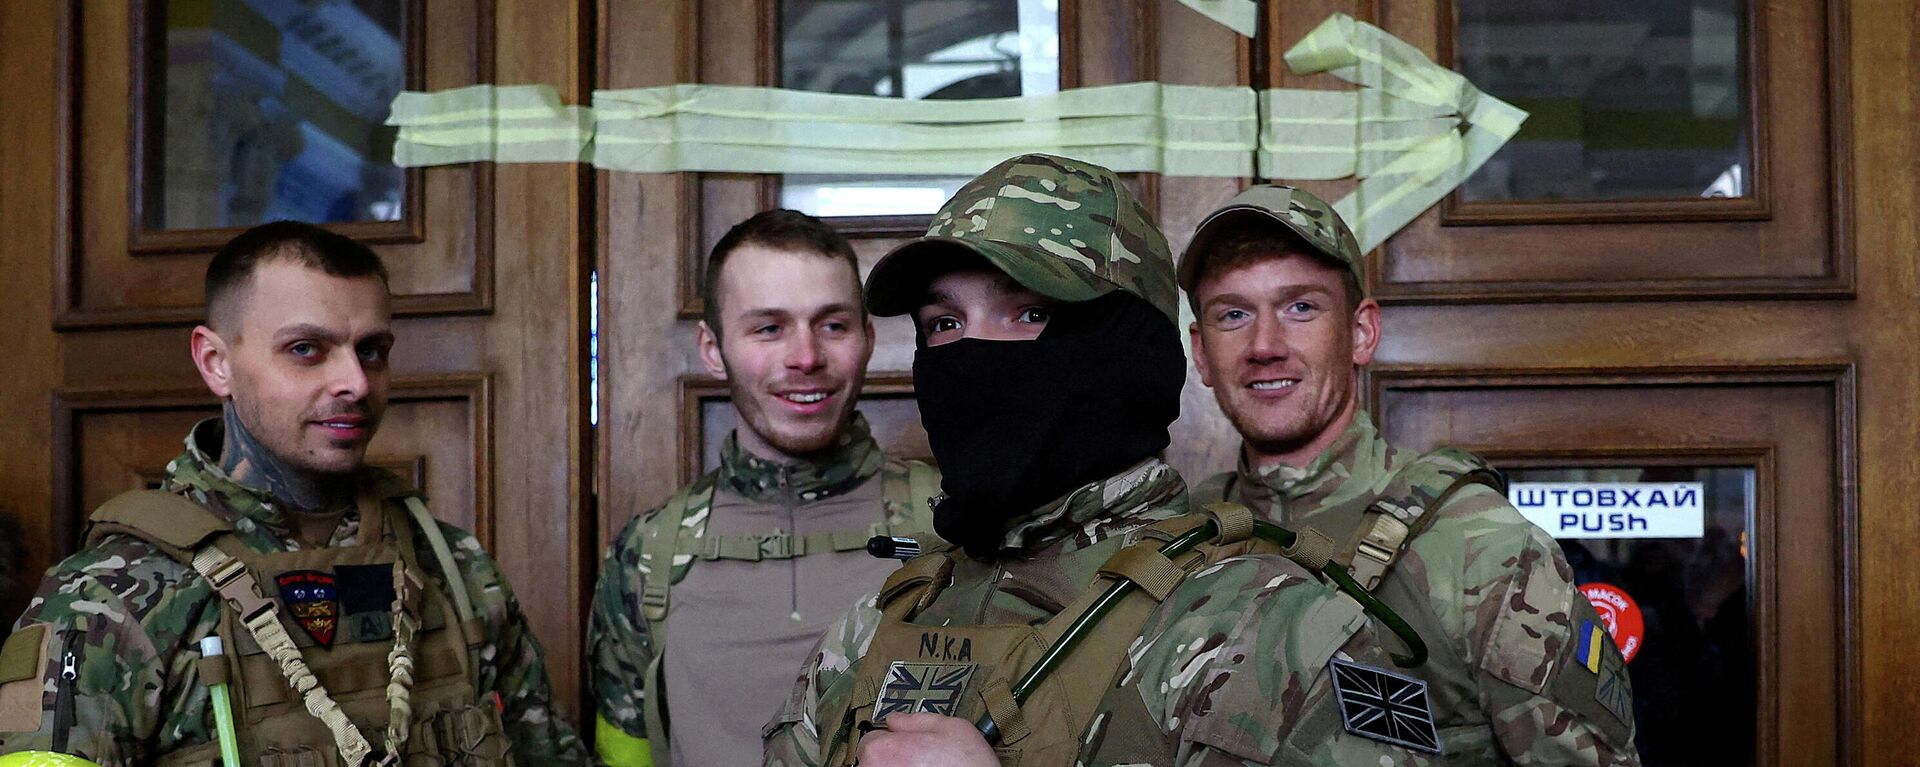 FILE PHOTO: Four foreign fighters from the UK pose for a picture prior to their departure towards the front line in the east of Ukraine following the Russian military operation, at the main train station in Lviv, Ukraine, March 5, 2022. Picture taken March 5, 2022 - Sputnik International, 1920, 31.03.2022